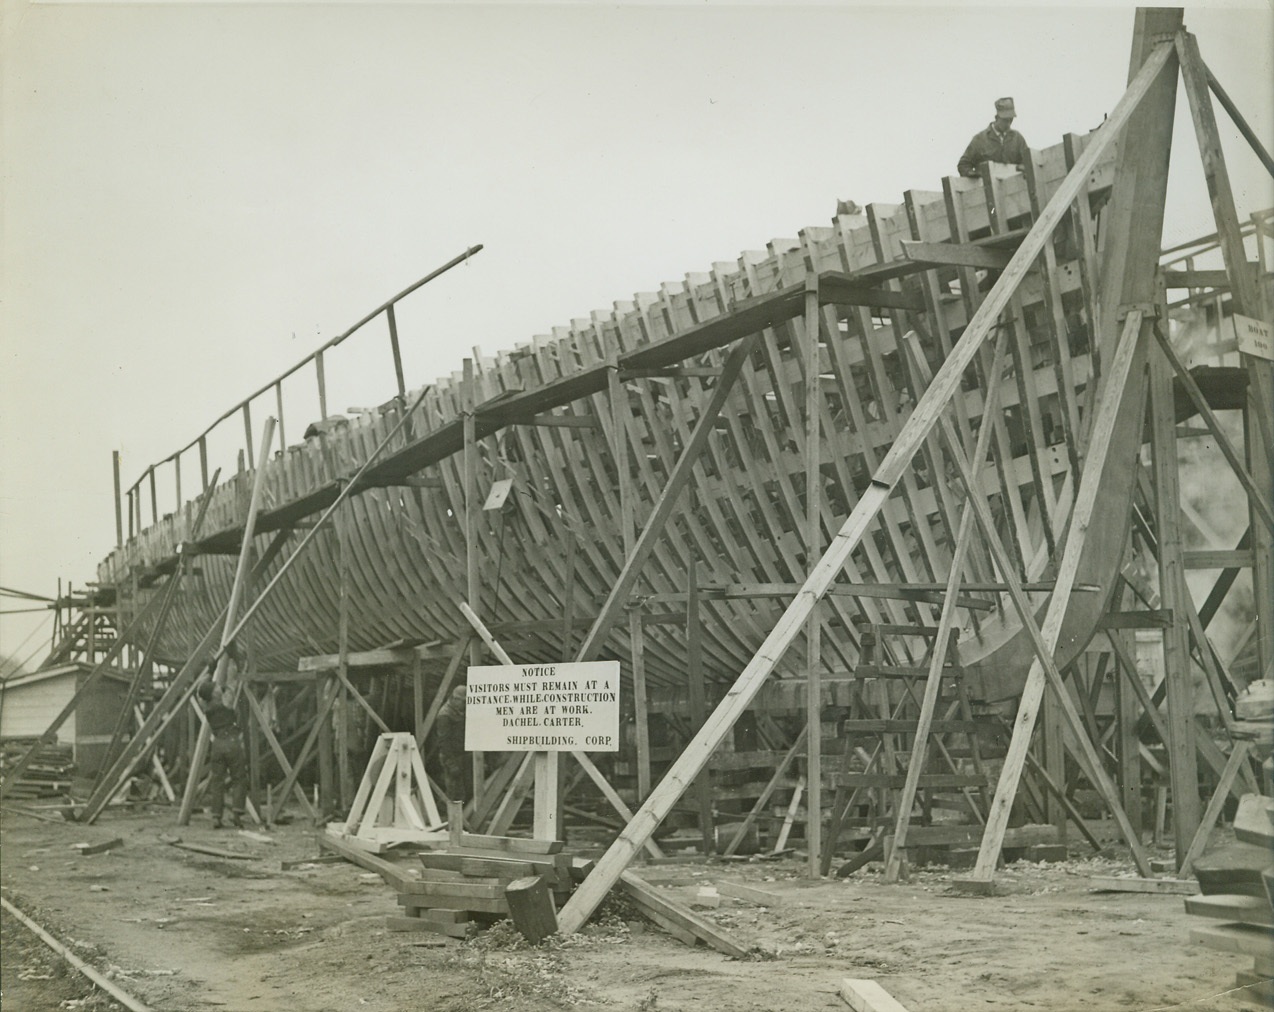 Milano Shipyards Get Defense Orders, 10/30/41  Benton Harbor, Mich.: One of many mine-sweepers under construction at the Dachel-Carter Shipbuilding Co. yards, here, is shown as it neared final stages, with framework finished. Large diesel engines will be installed in the completed boats. Credit: ACME.;